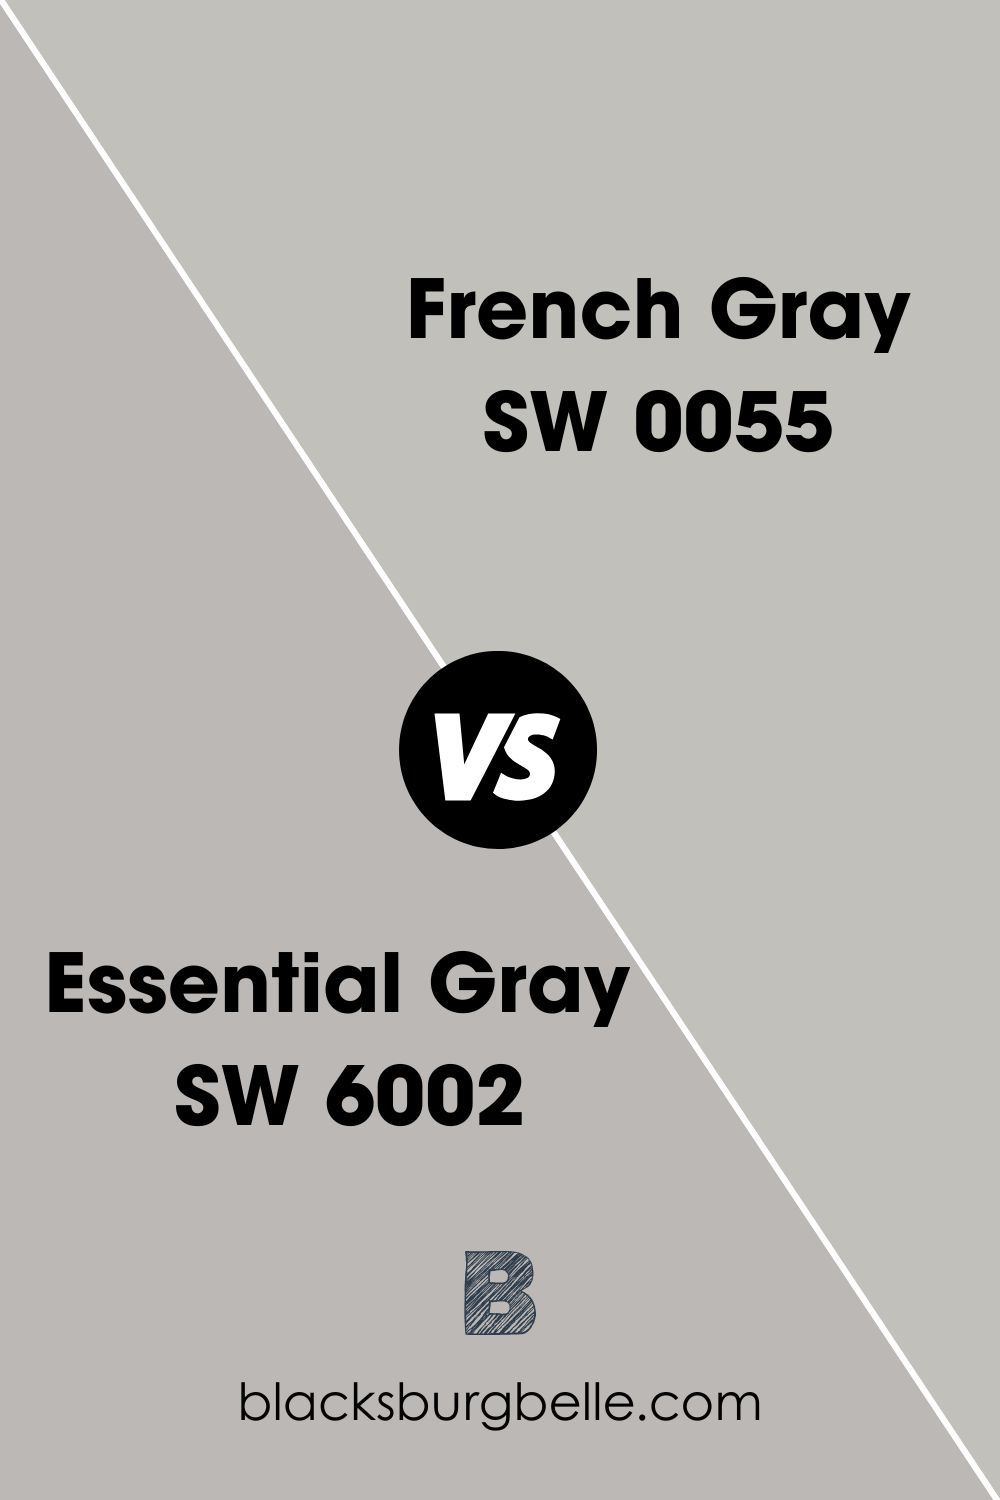 French Gray SW 0055